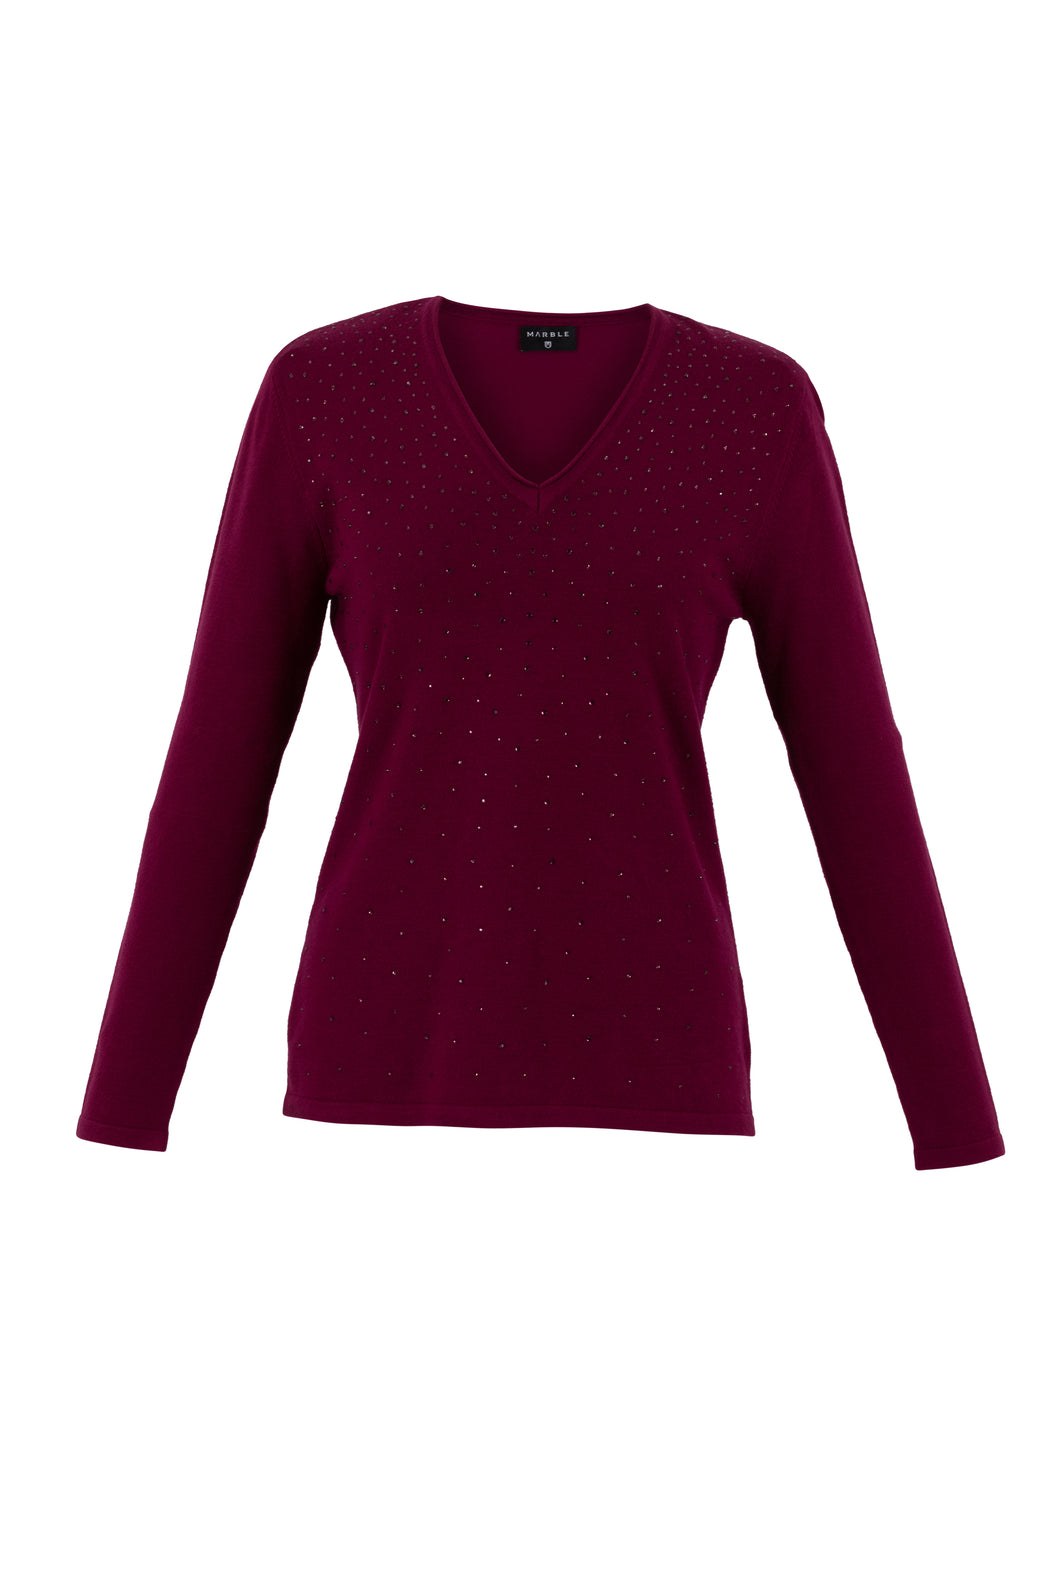 Marble Classic Fit V-Neck Long Sleeve Sweater with Front Sparkle